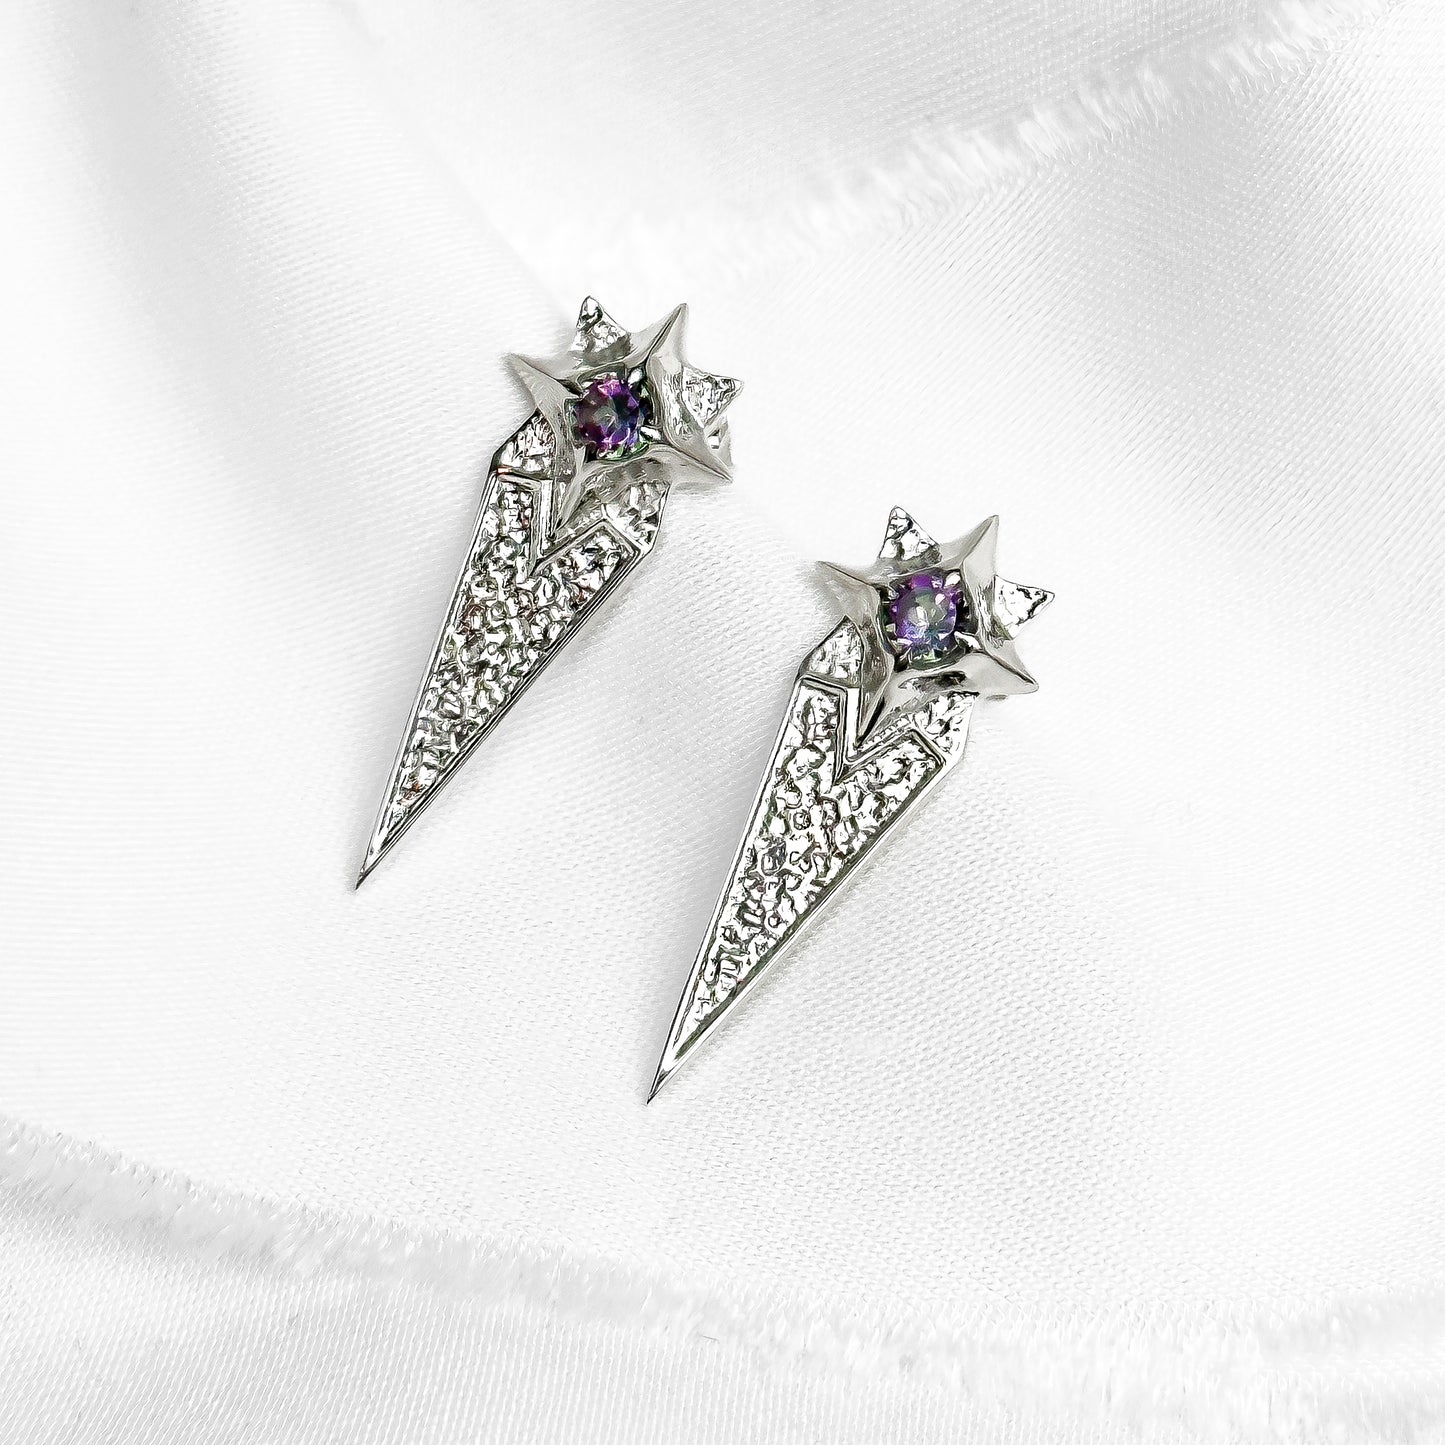 Shooting Star Sterling Silver Stud Earrings with Mystic Topaz